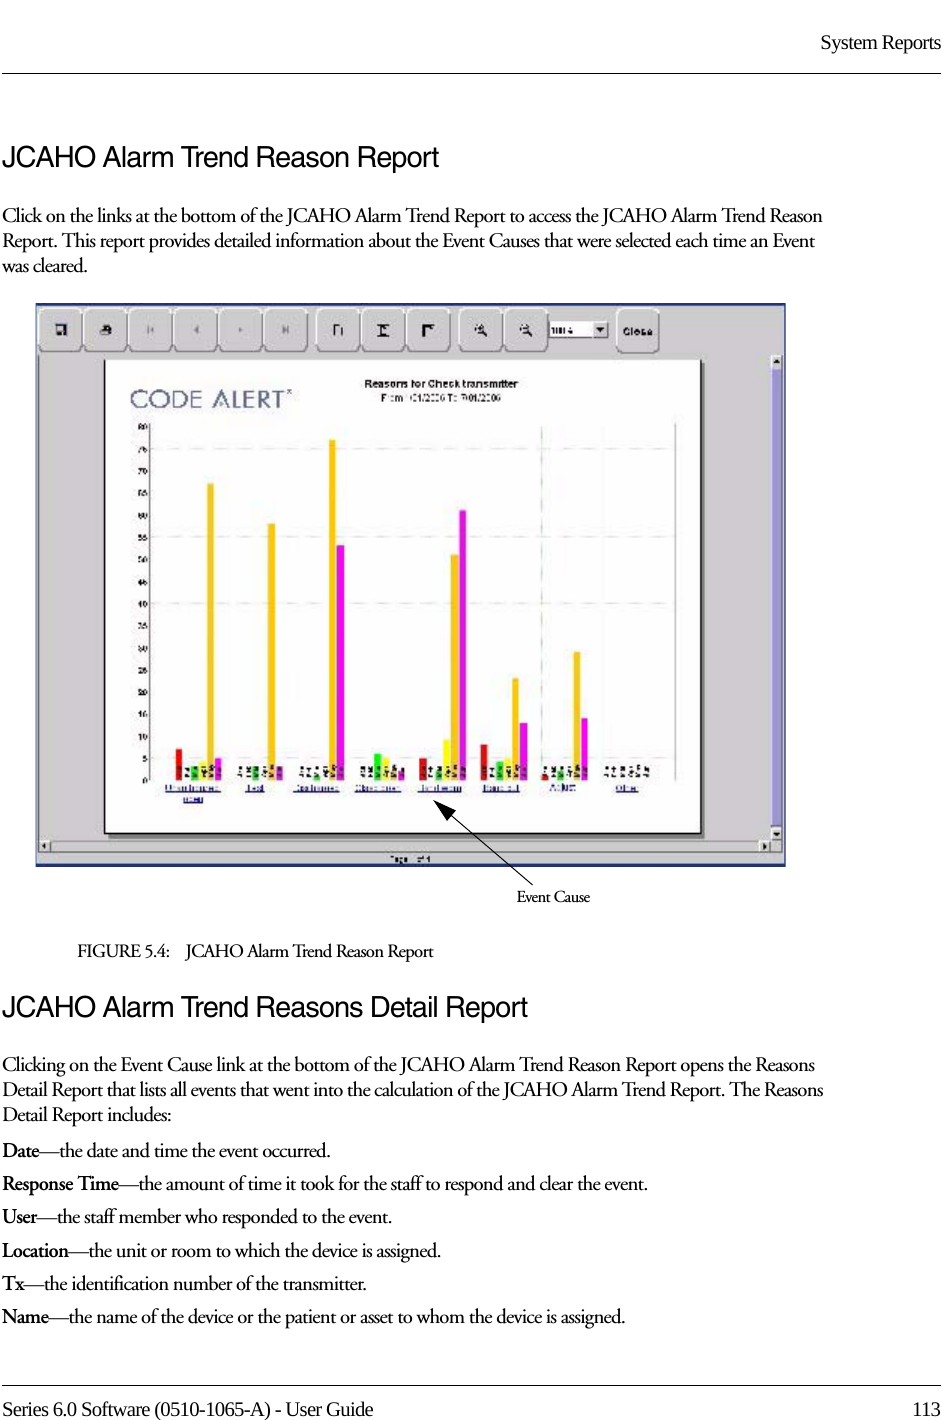 Series 6.0 Software (0510-1065-A) - User Guide  113System ReportsJCAHO Alarm Trend Reason ReportClick on the links at the bottom of the JCAHO Alarm Trend Report to access the JCAHO Alarm Trend Reason Report. This report provides detailed information about the Event Causes that were selected each time an Event was cleared.FIGURE 5.4:    JCAHO Alarm Trend Reason ReportJCAHO Alarm Trend Reasons Detail ReportClicking on the Event Cause link at the bottom of the JCAHO Alarm Trend Reason Report opens the Reasons Detail Report that lists all events that went into the calculation of the JCAHO Alarm Trend Report. The Reasons Detail Report includes:Date—the date and time the event occurred.Response Time—the amount of time it took for the staff to respond and clear the event.User—the staff member who responded to the event. Location—the unit or room to which the device is assigned.Tx—the identification number of the transmitter.Name—the name of the device or the patient or asset to whom the device is assigned.Event Cause